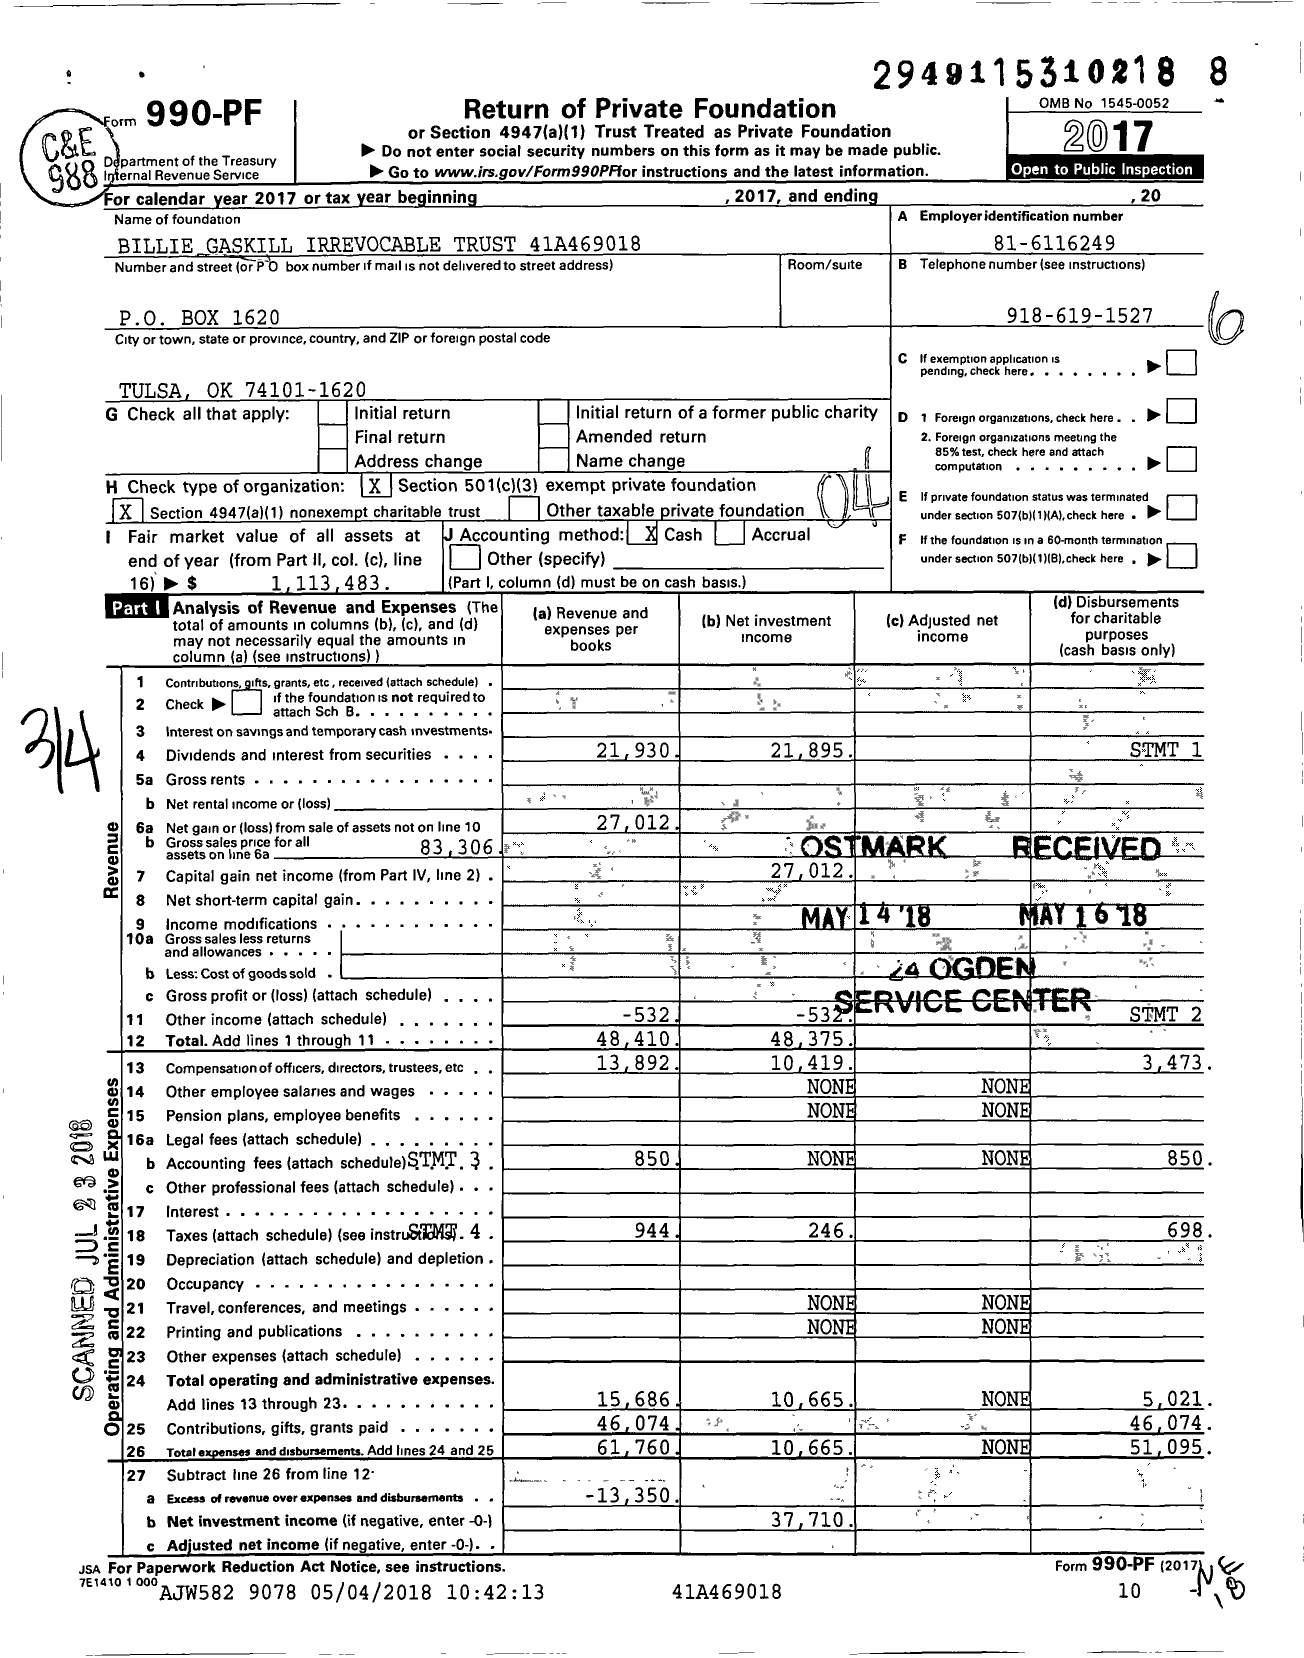 Image of first page of 2017 Form 990PF for Billie Gaskill Irrevocable Trust 41a469018